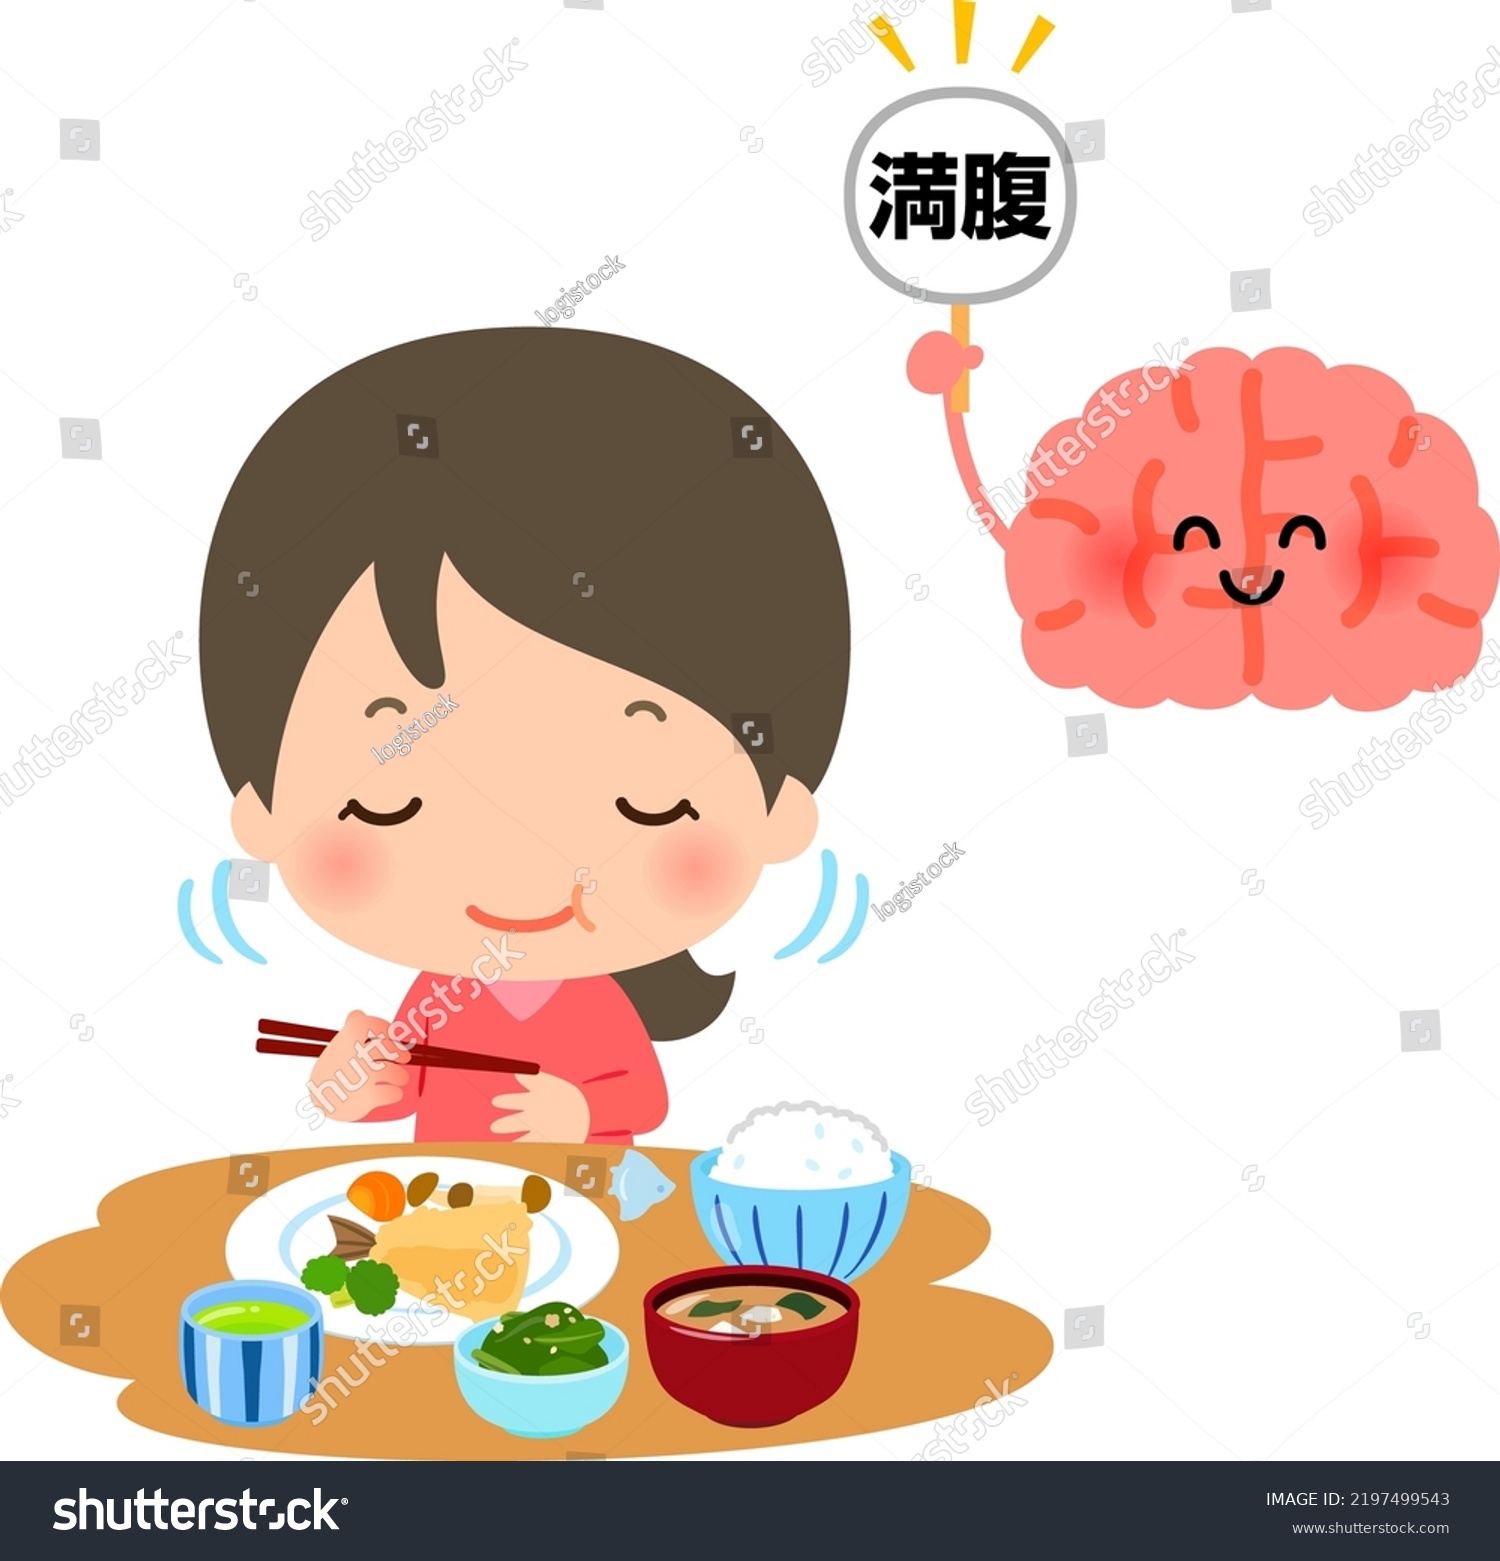 SVG of A woman chewing and eating well and a brain that gives signs of satiety, 'satiety' svg